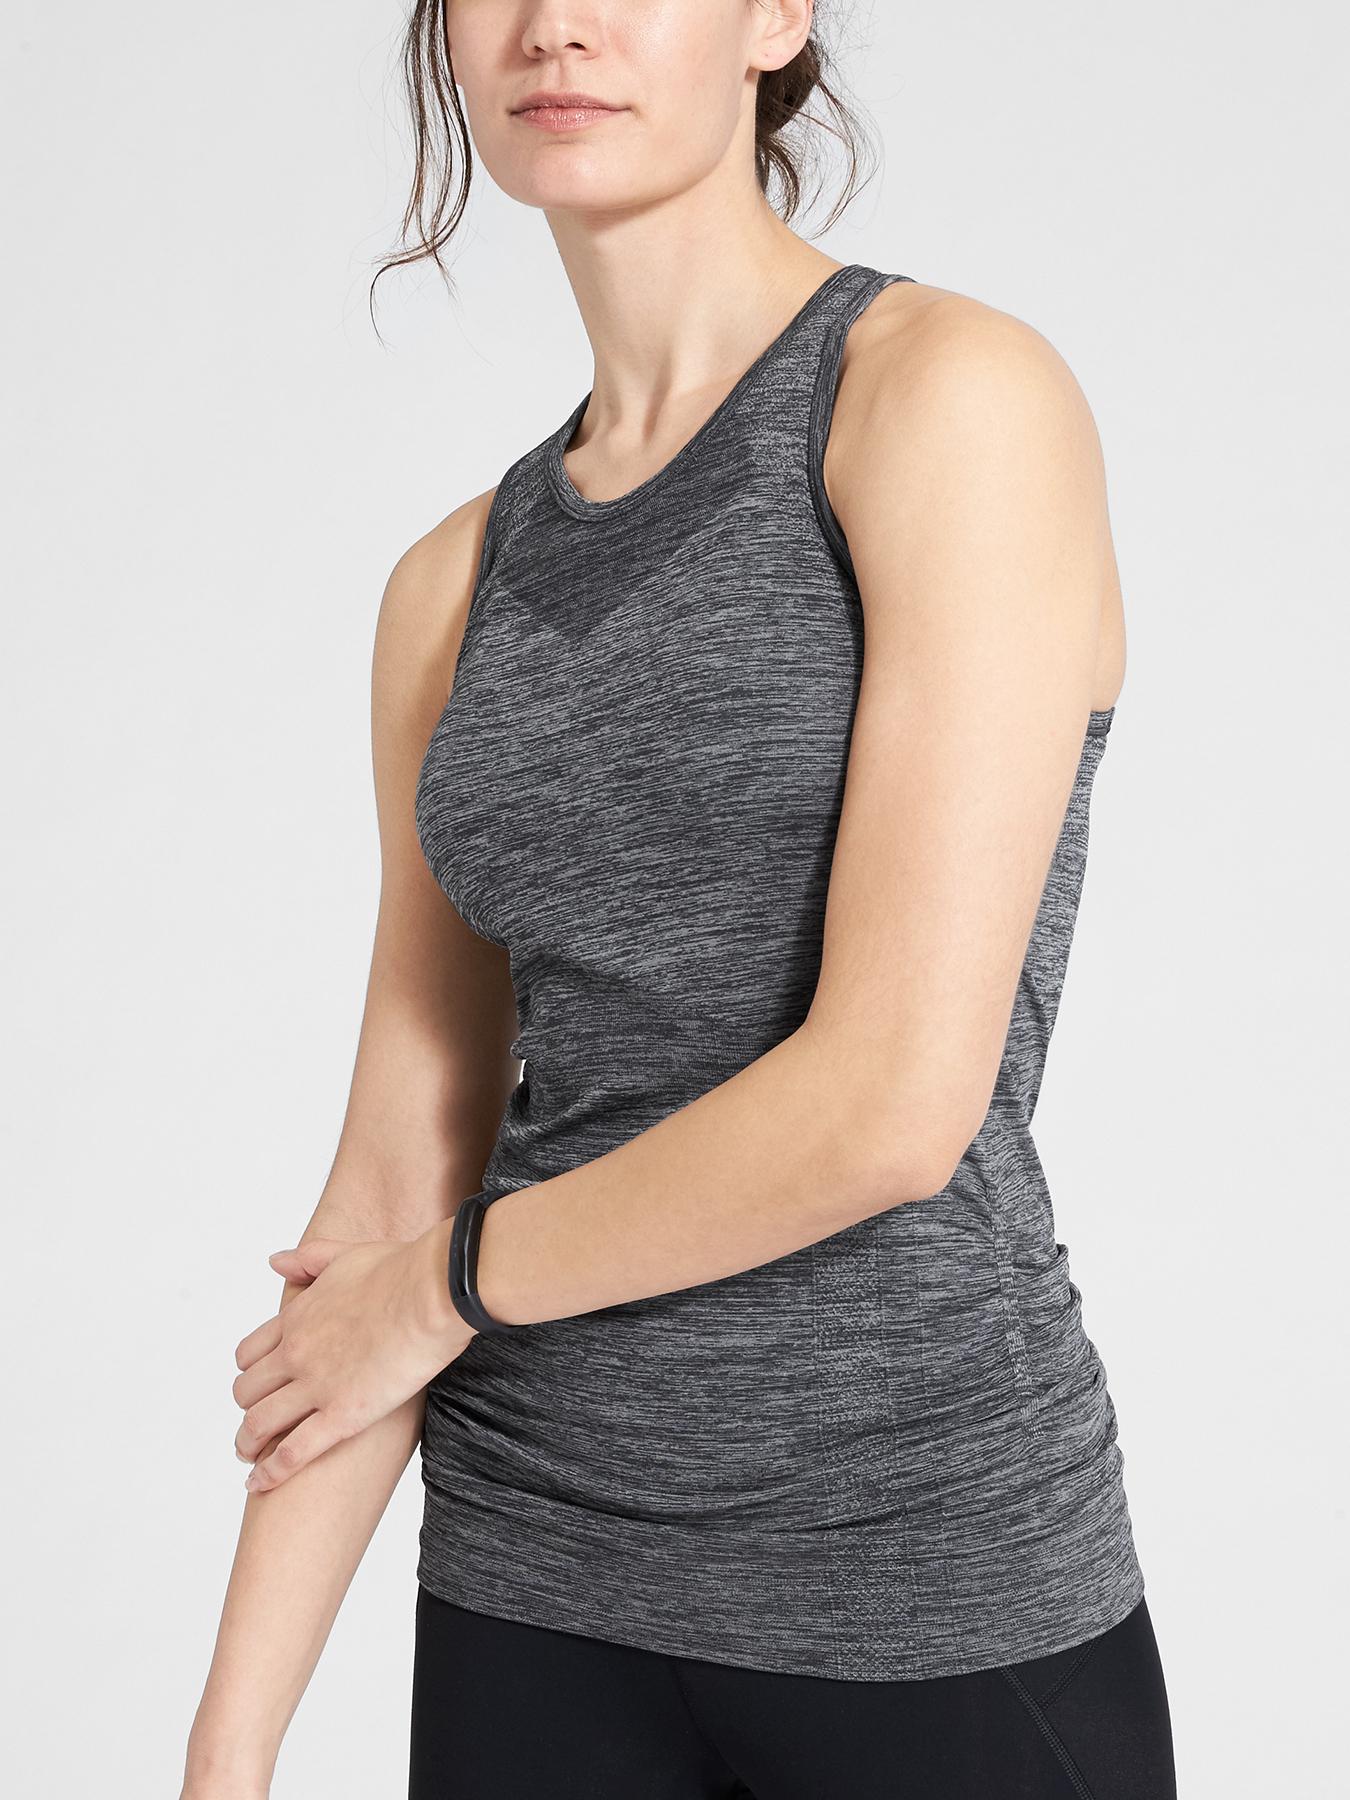 ATHLETA Finish Fast Racerback Tank Top Ruched Sides Sleeveless #591298 |  Gray M